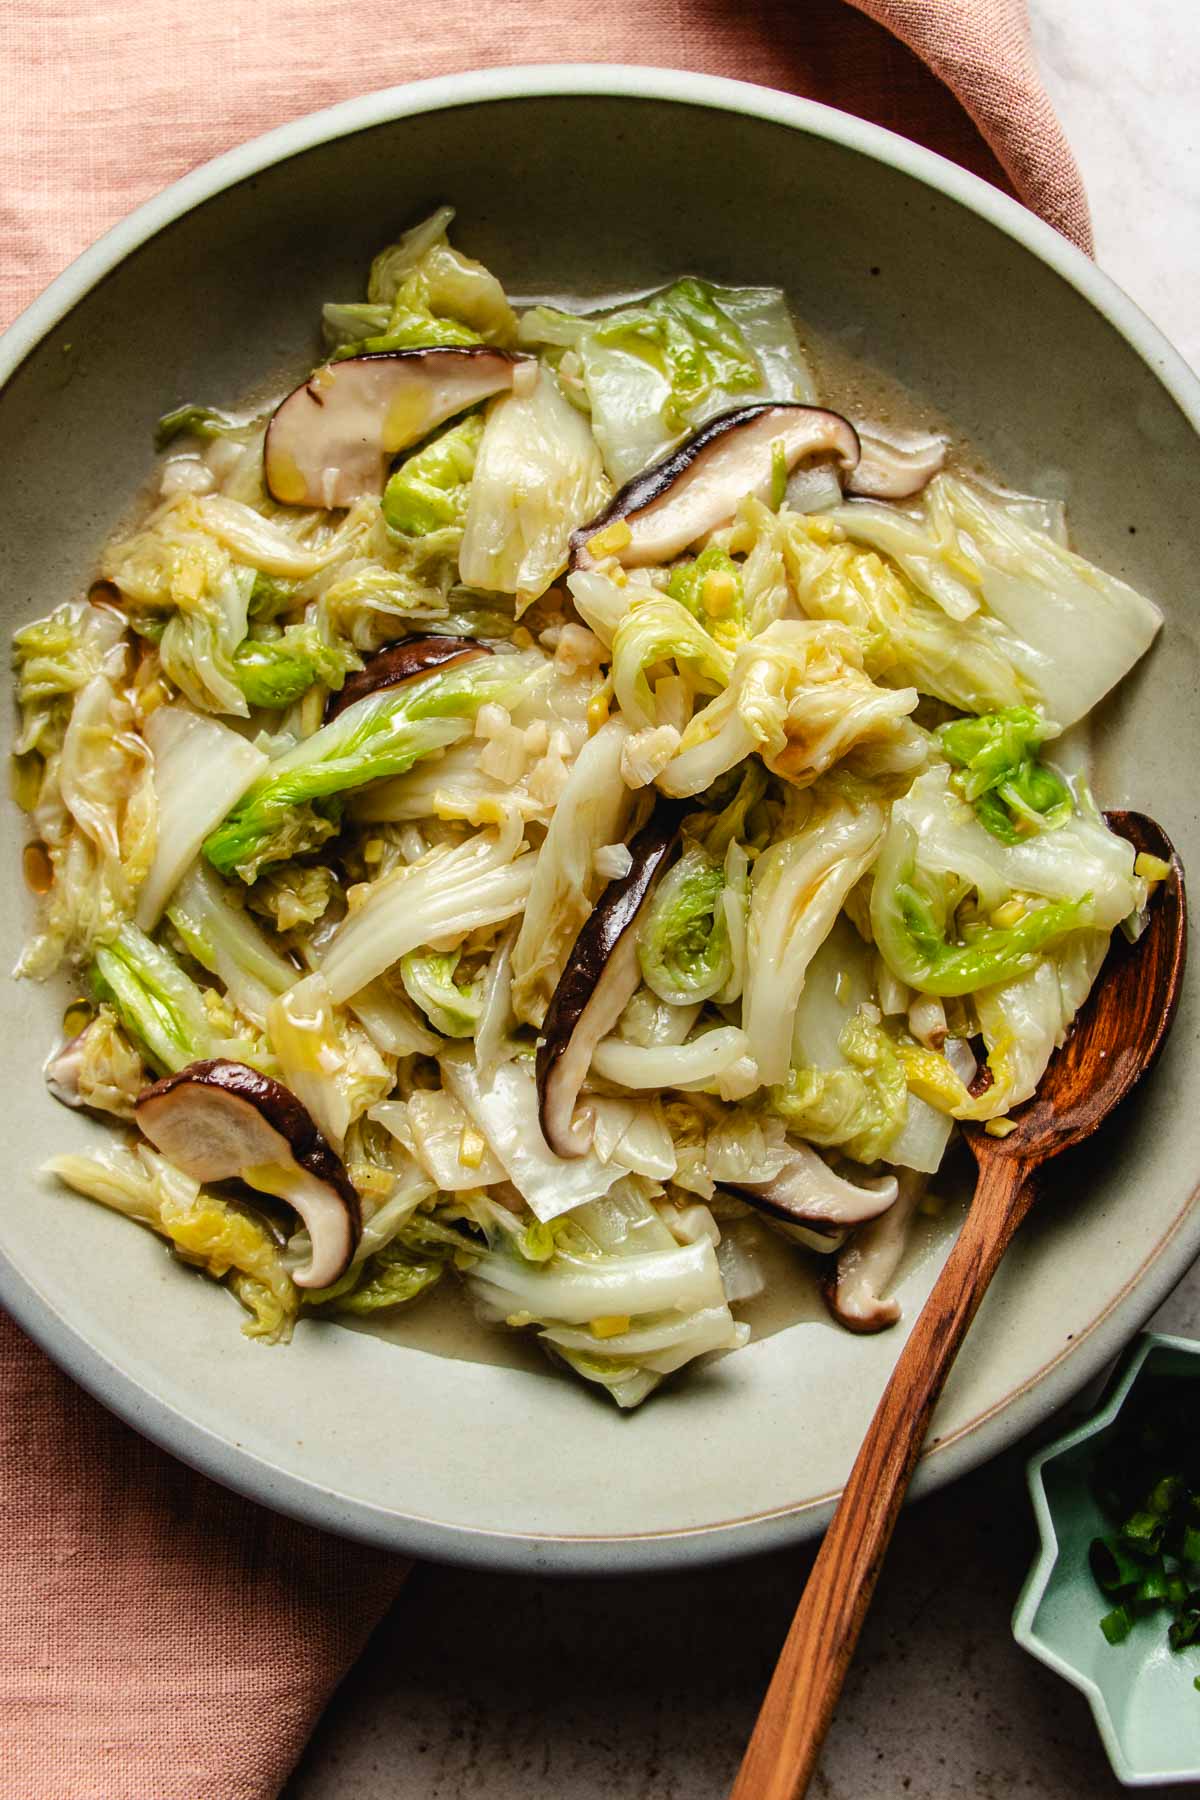 Image shows sauteed napa cabbage with garlic ginger and shiitake mushrooms Asian style served in a light gray color plate.